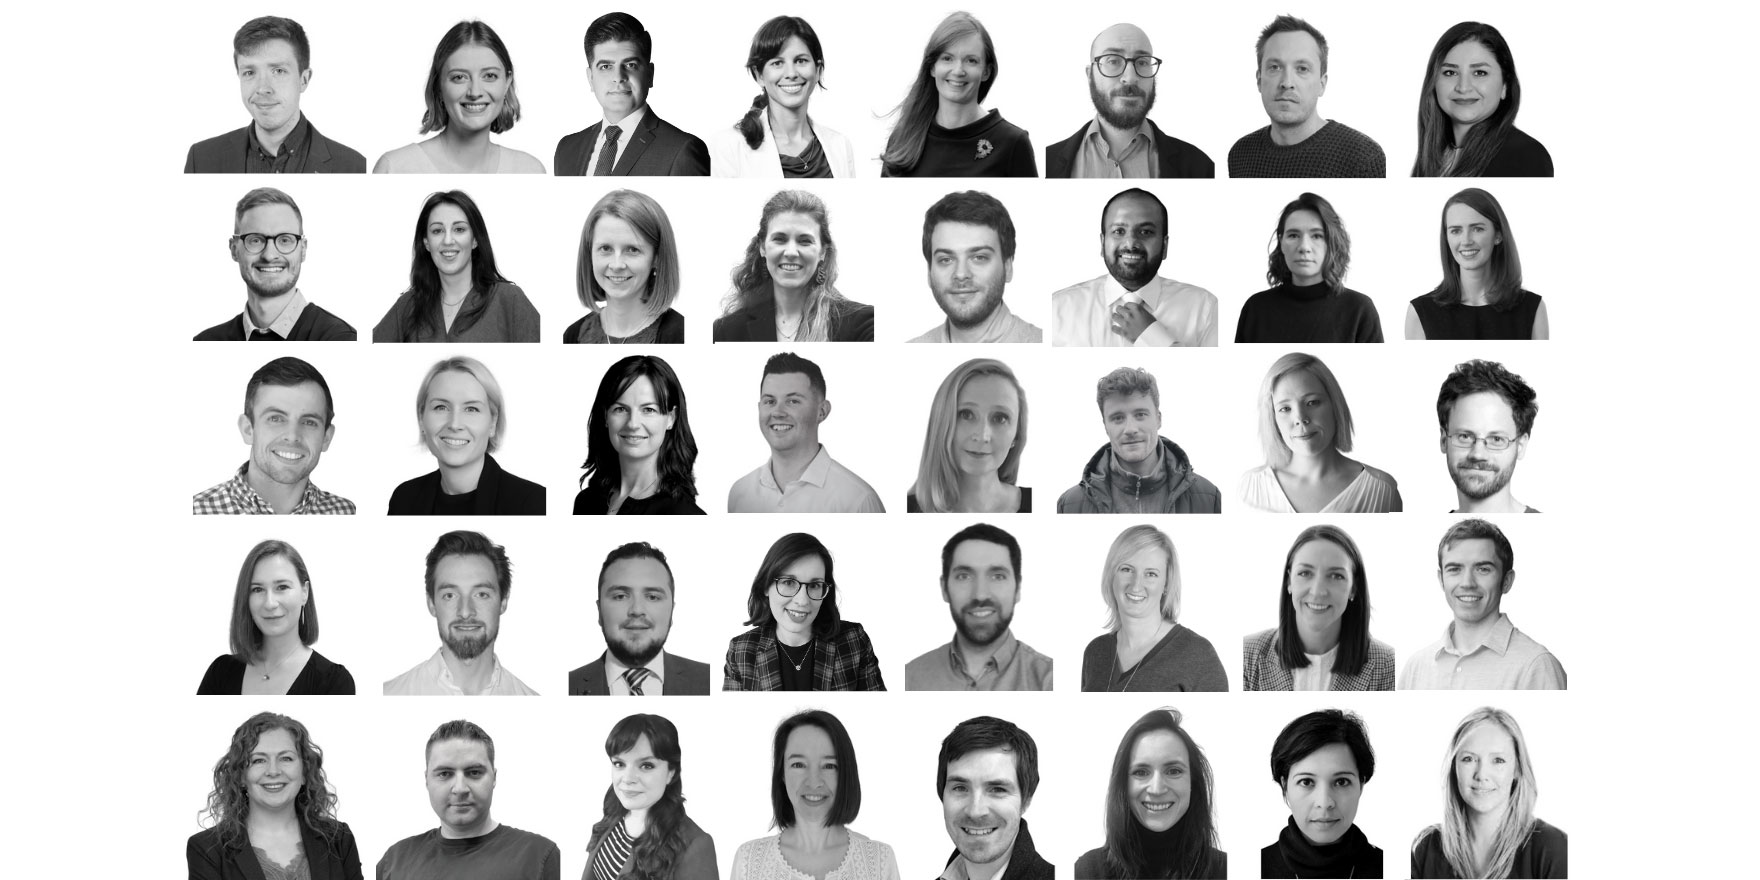 A black and white photo, compiling 40 headshots of new Young Academy Ireland members, composed in four rows.